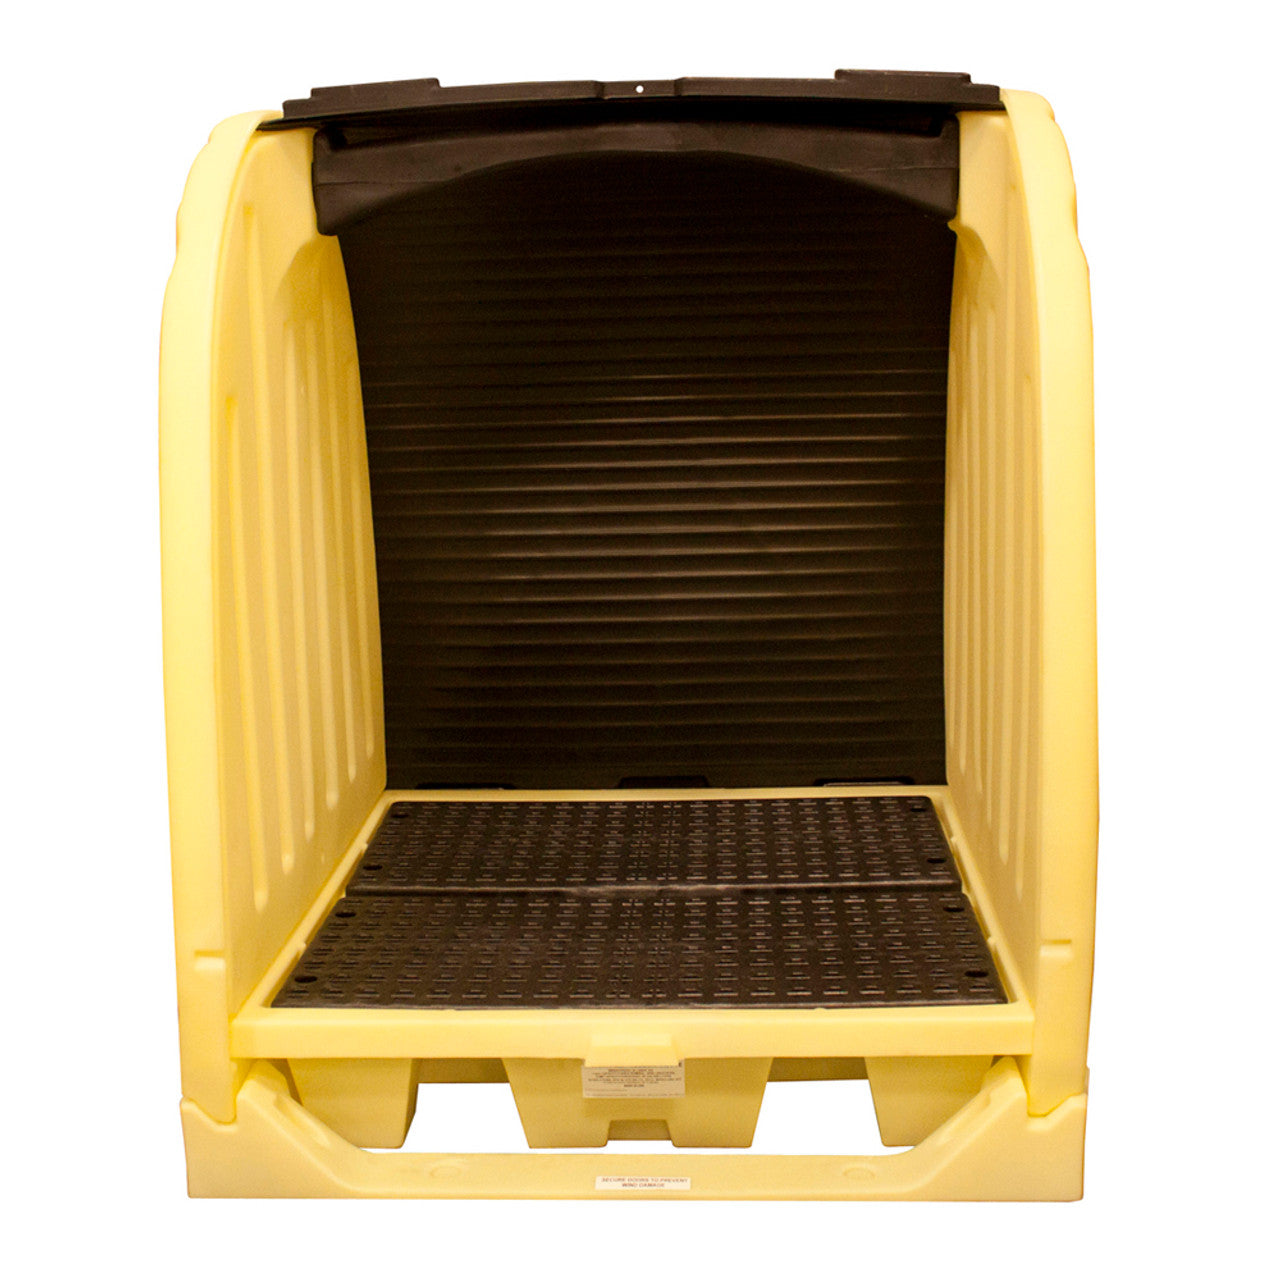 ENPAC - 4 Drum Roll-Top Hardcover Spill Pallet, Yellow